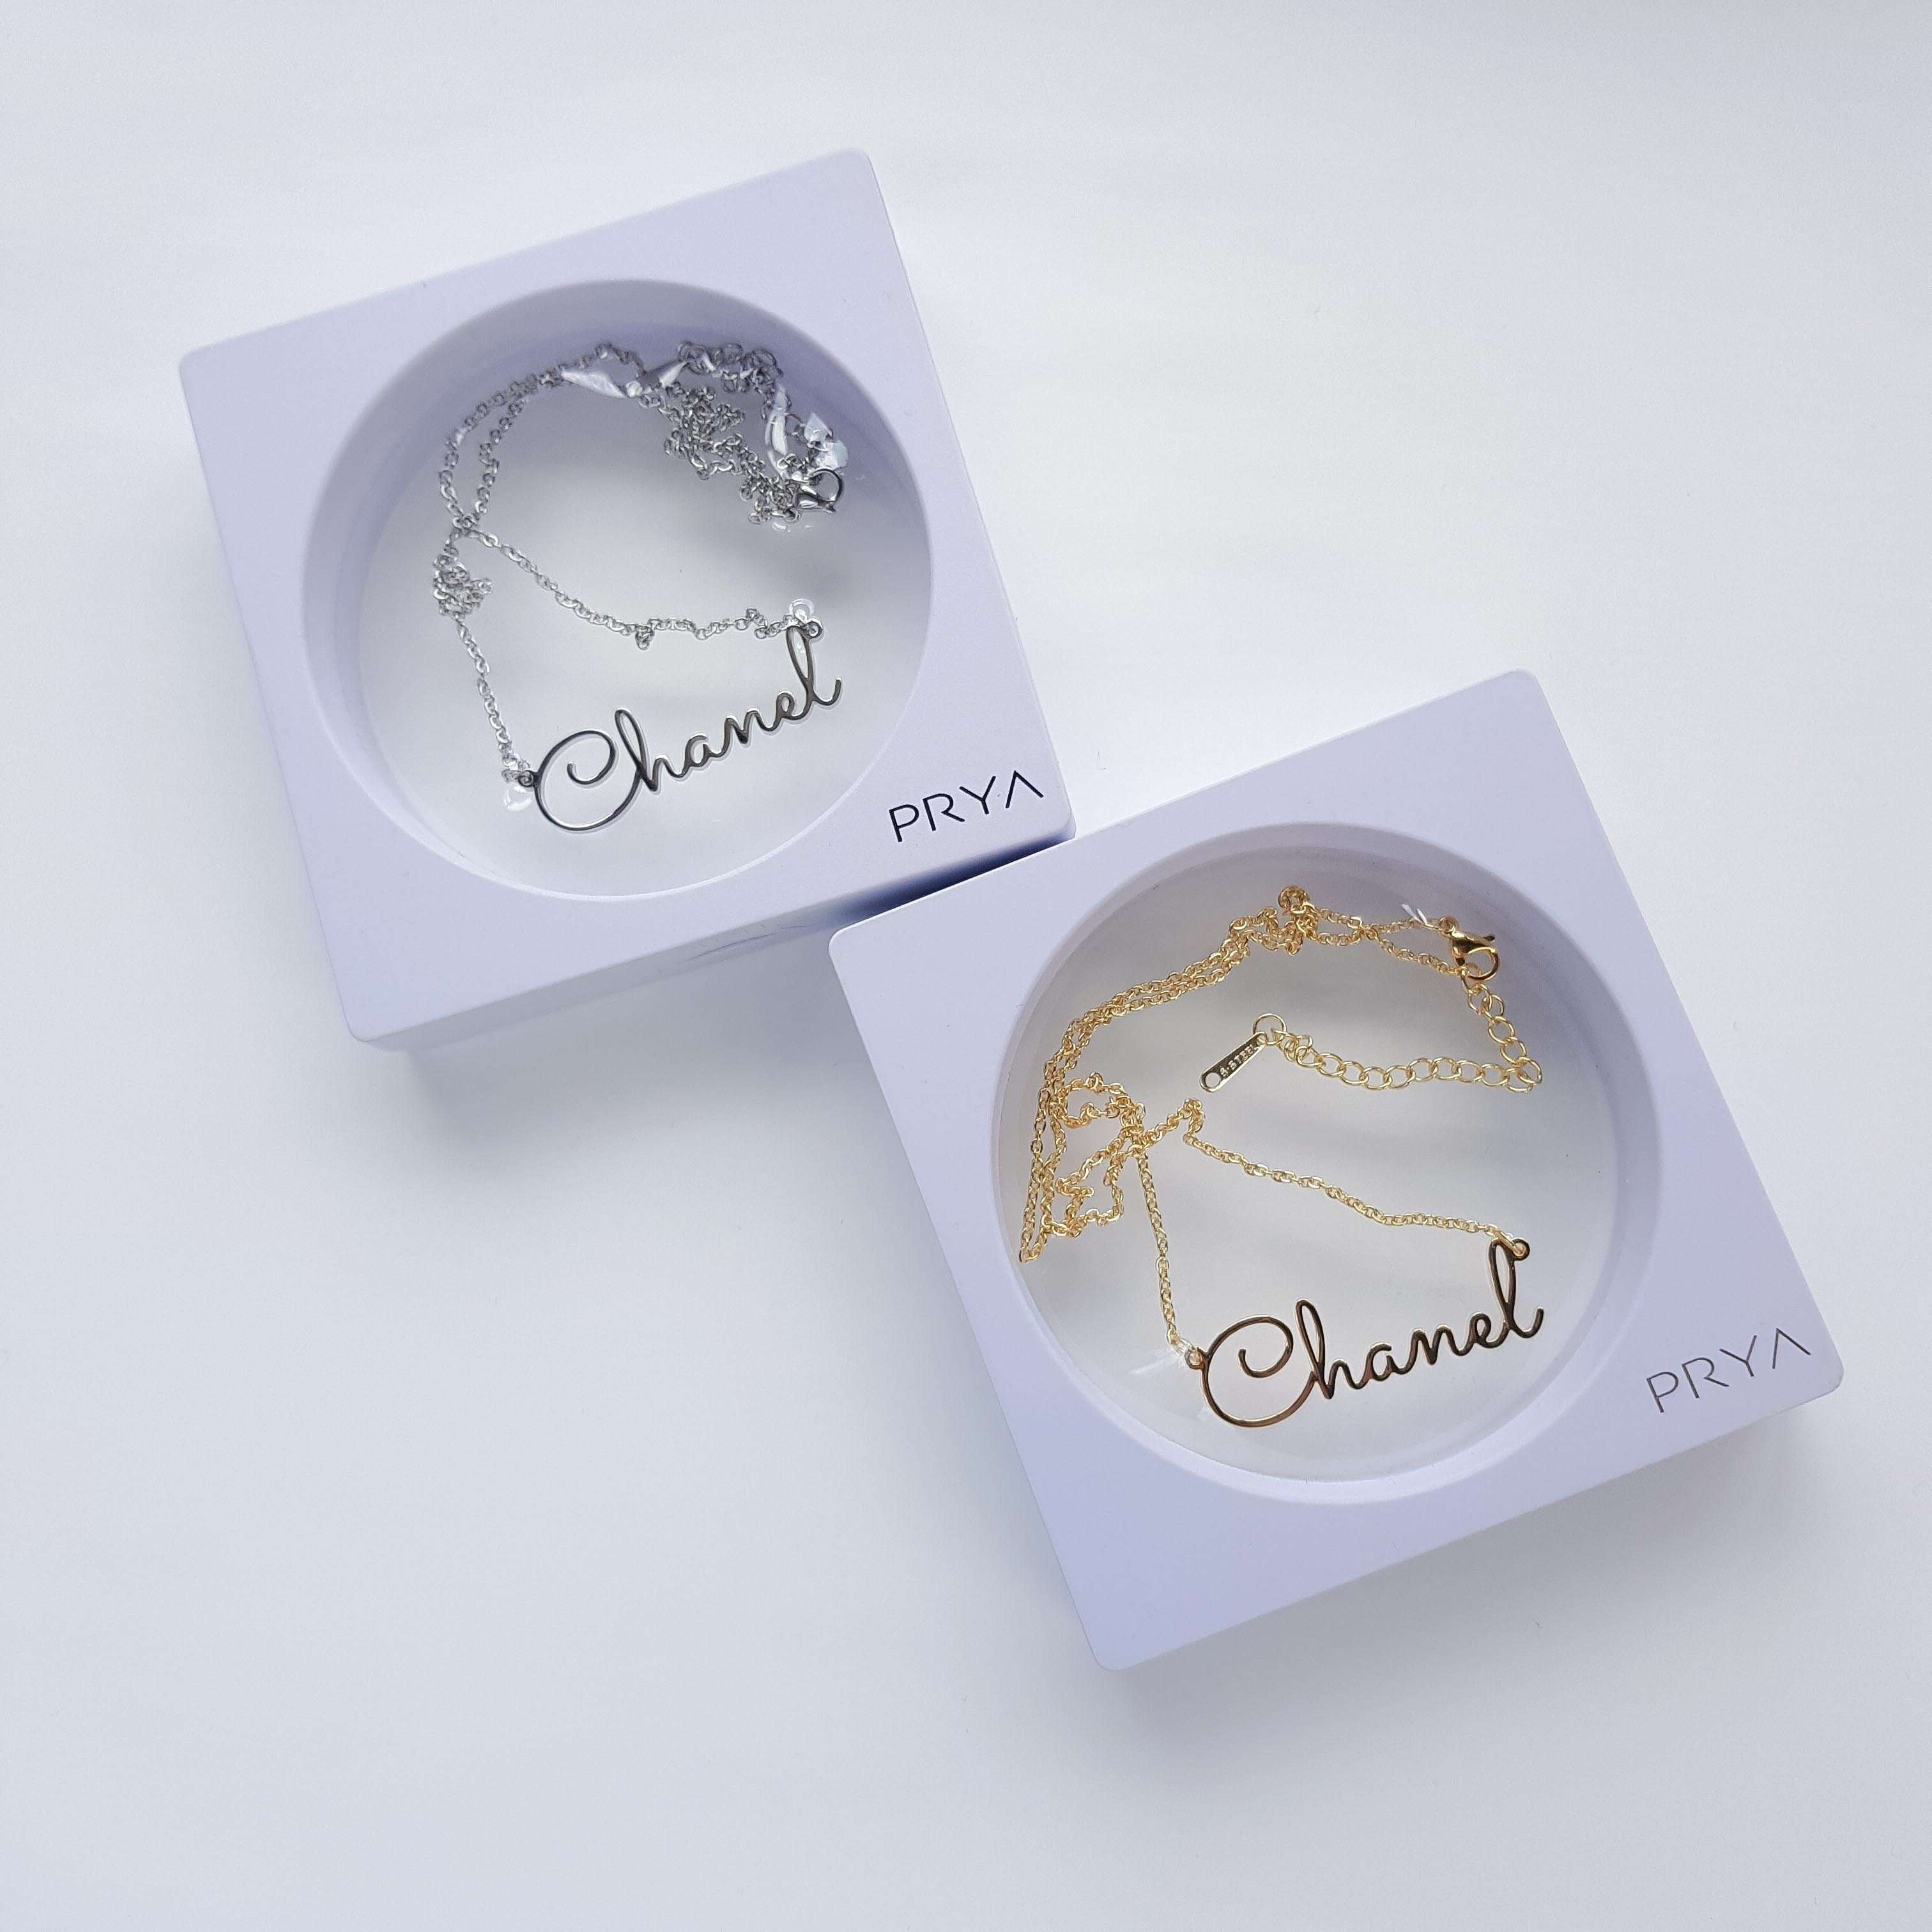 Name necklaces in gold and silver, both in luxury display boxes